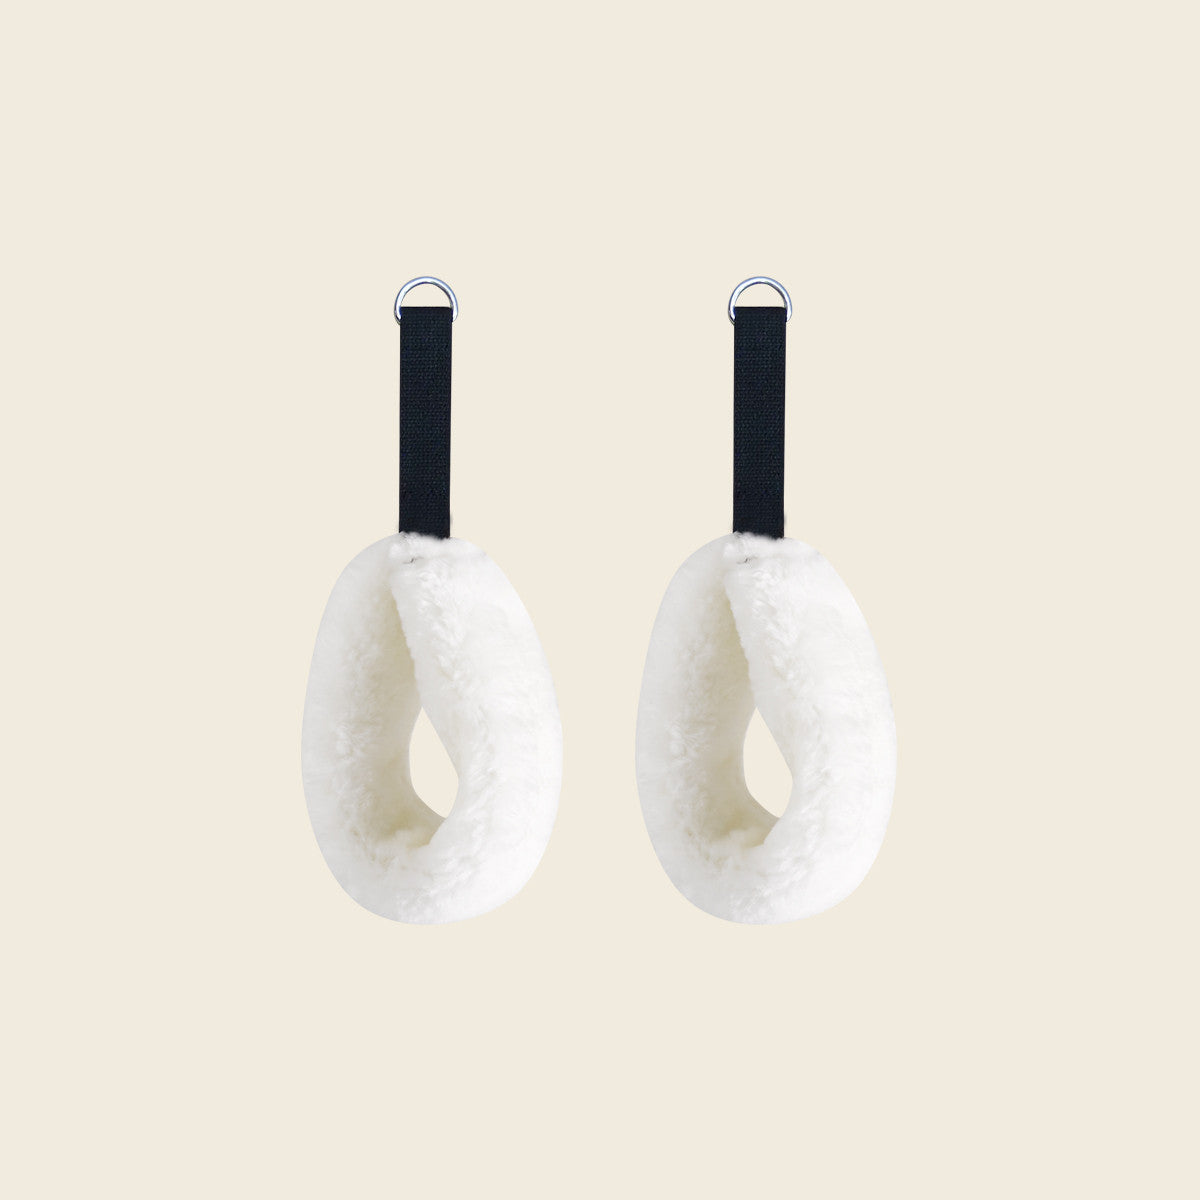 Sheepskin Loops With Canvas Straps For Leg Springs (Pair)